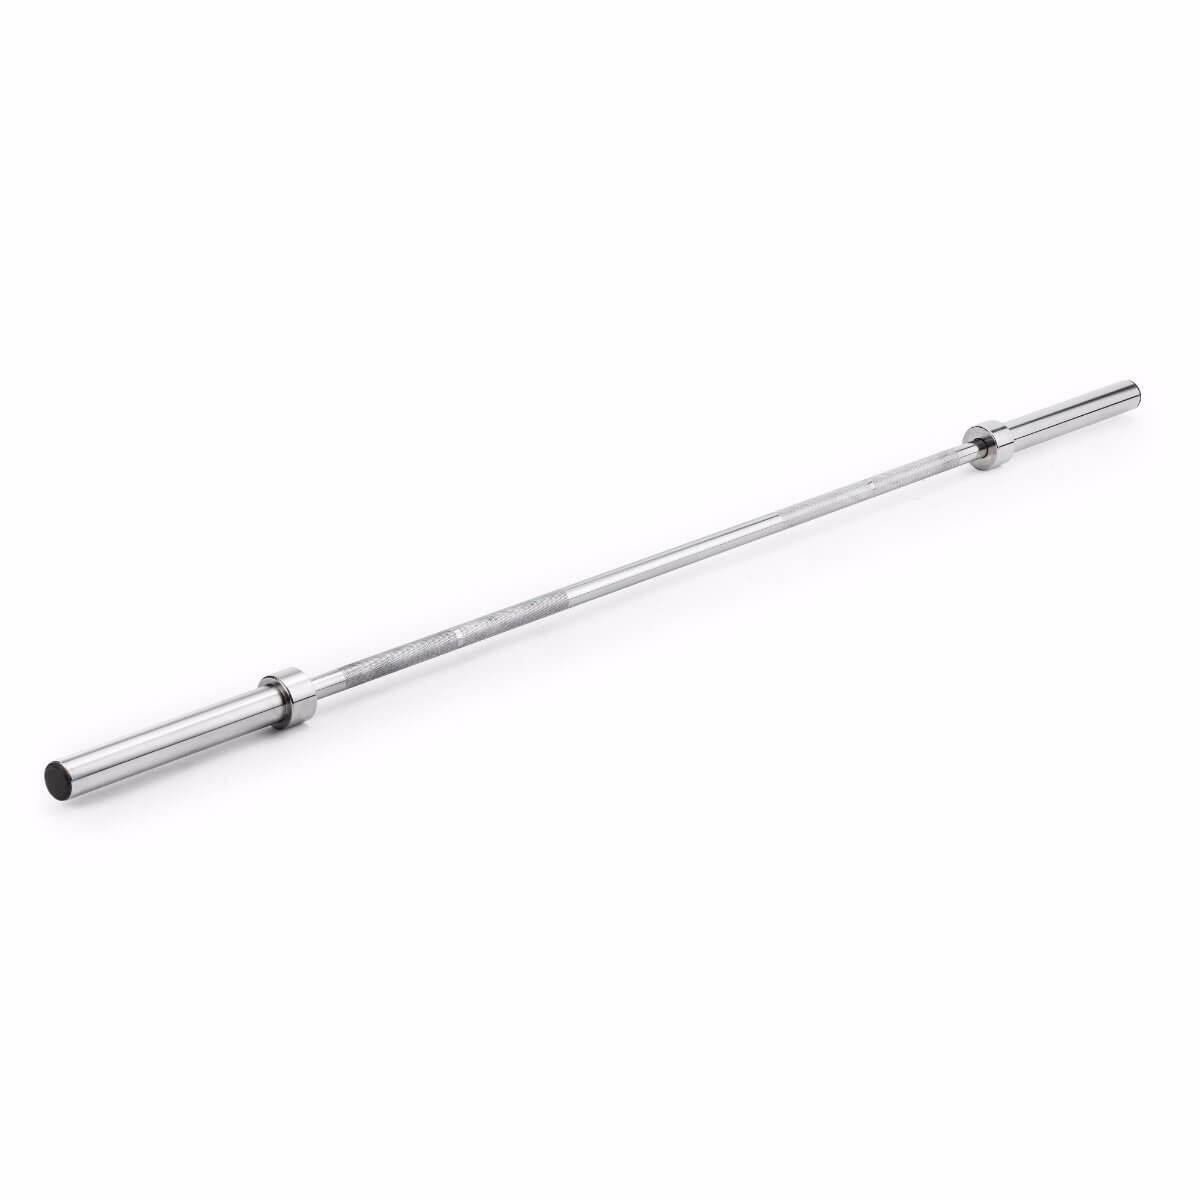 YORK York 7ft Olympic Weight Lifting Barbell 20kg